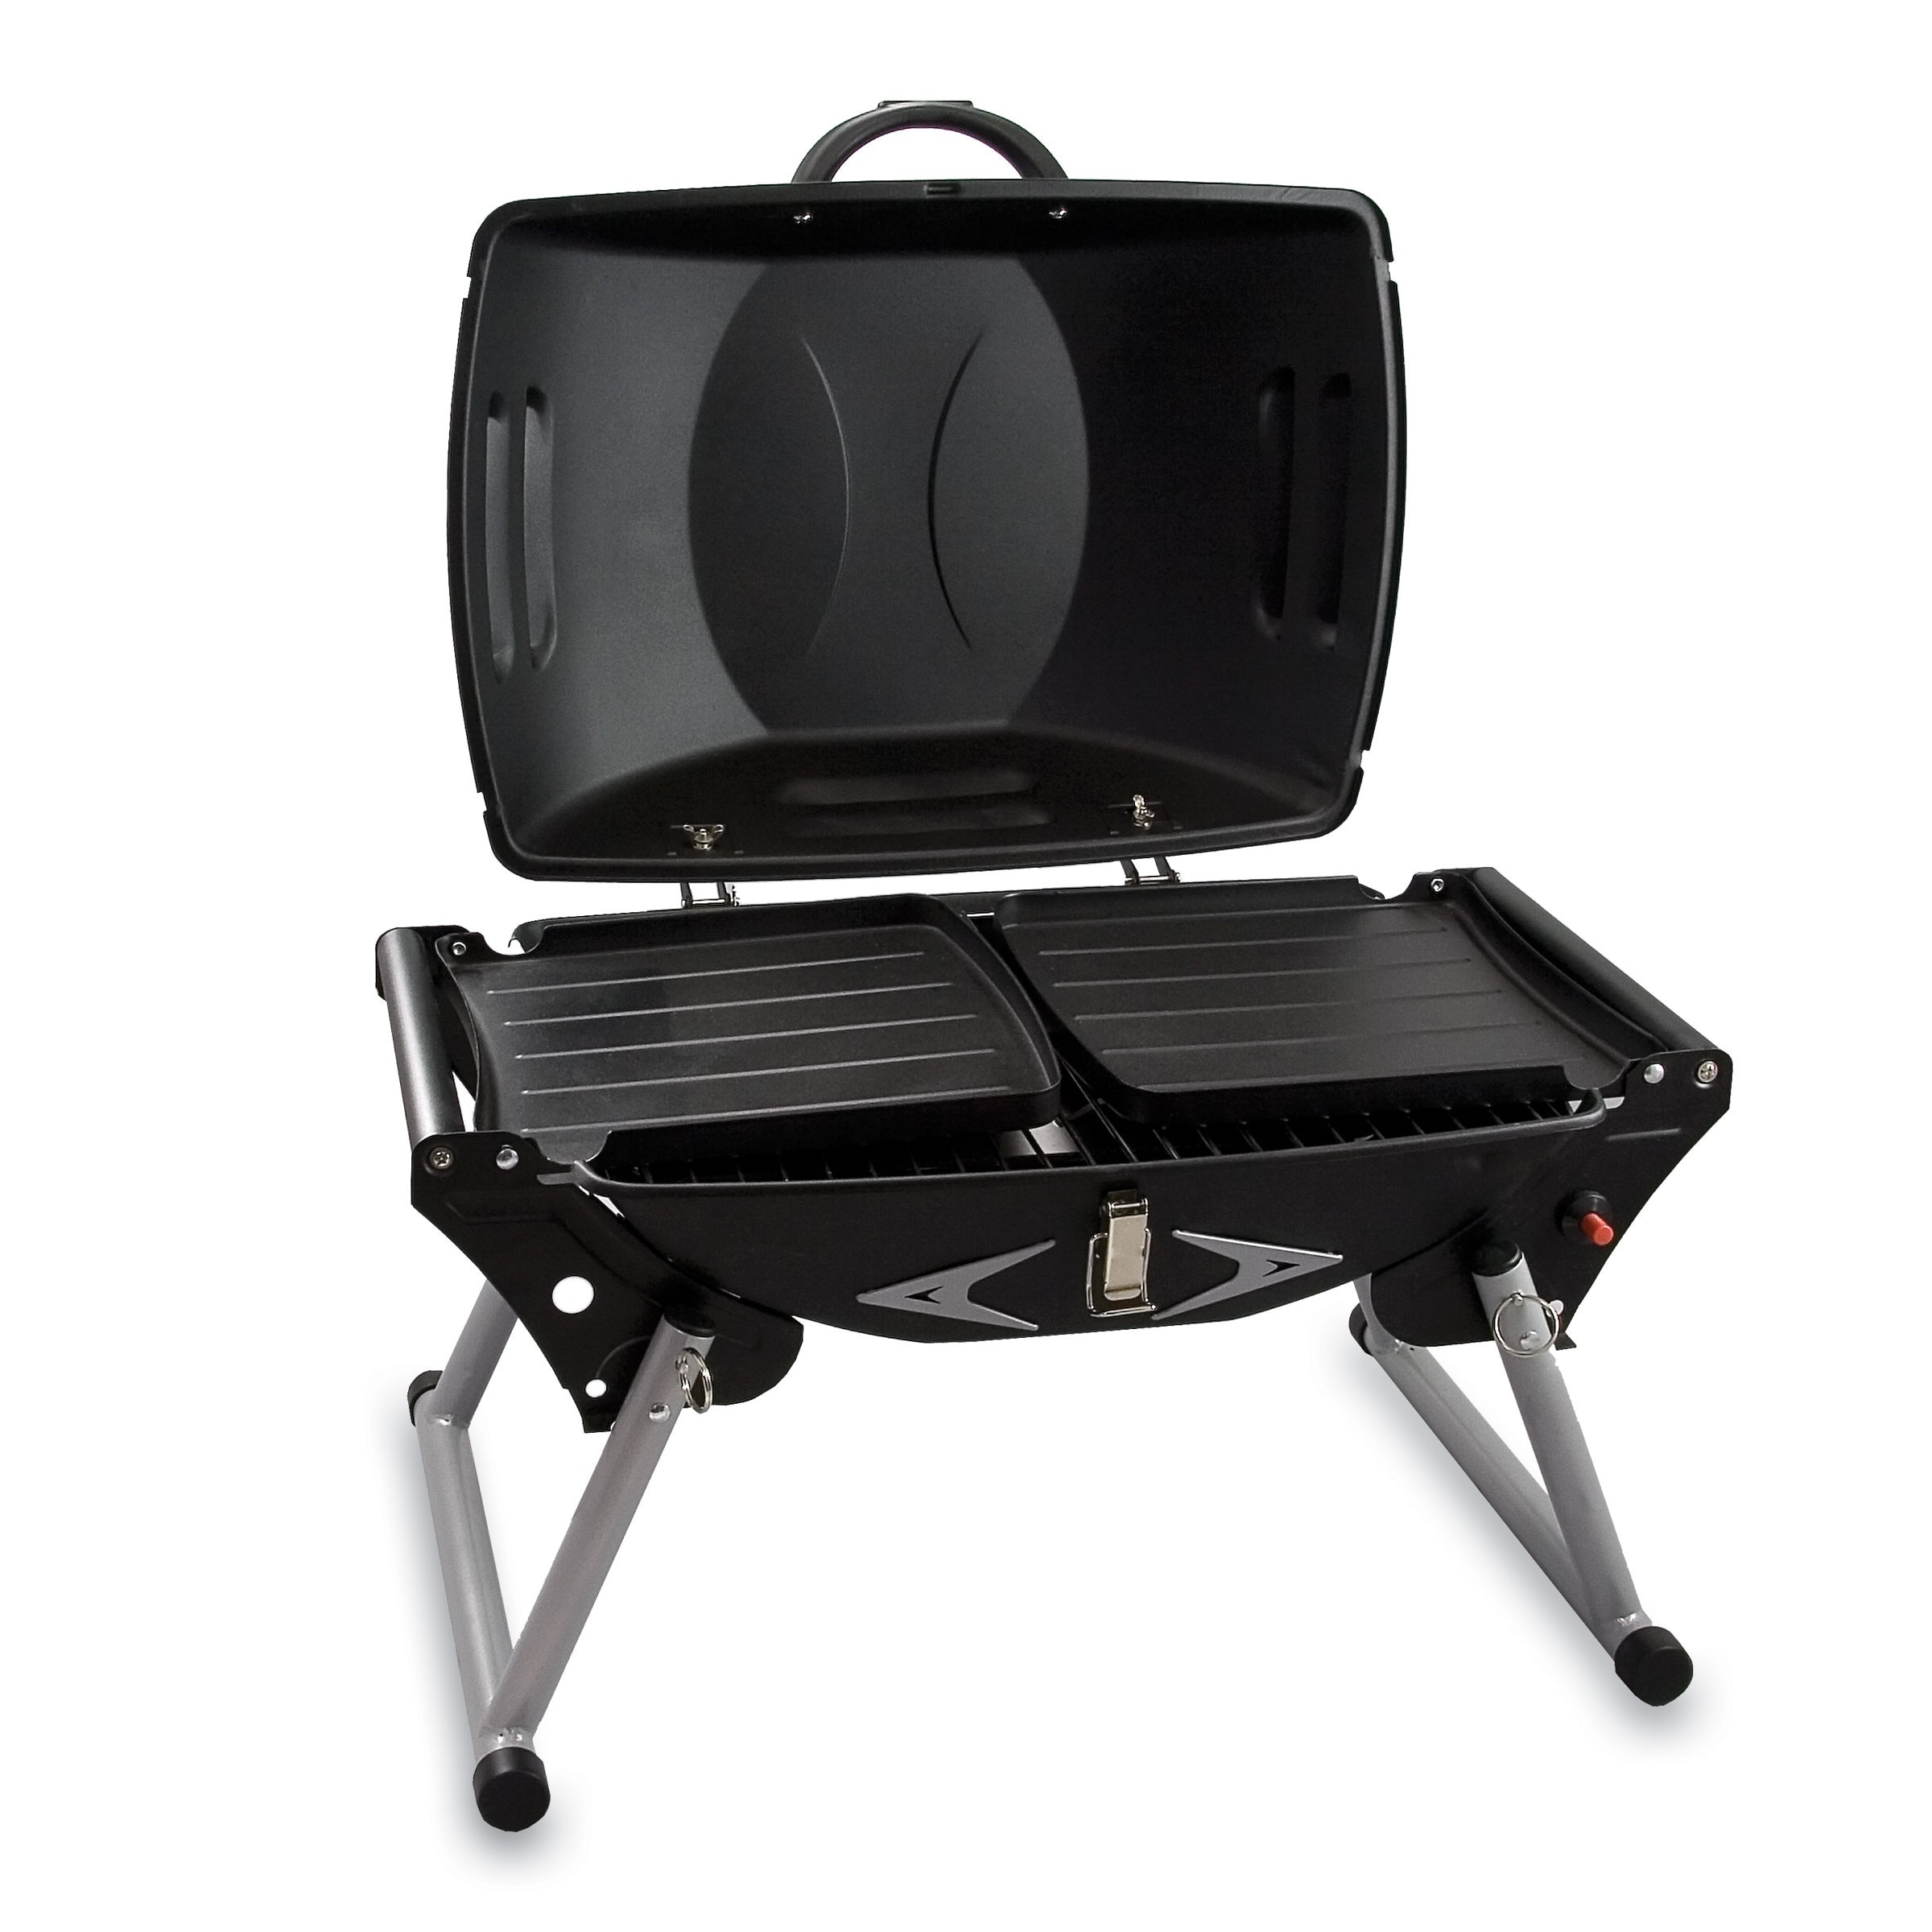 Shop Picnic Time Portagrillo Portable Gas Bbq Grill Overstock 4229963,Rotel Dip